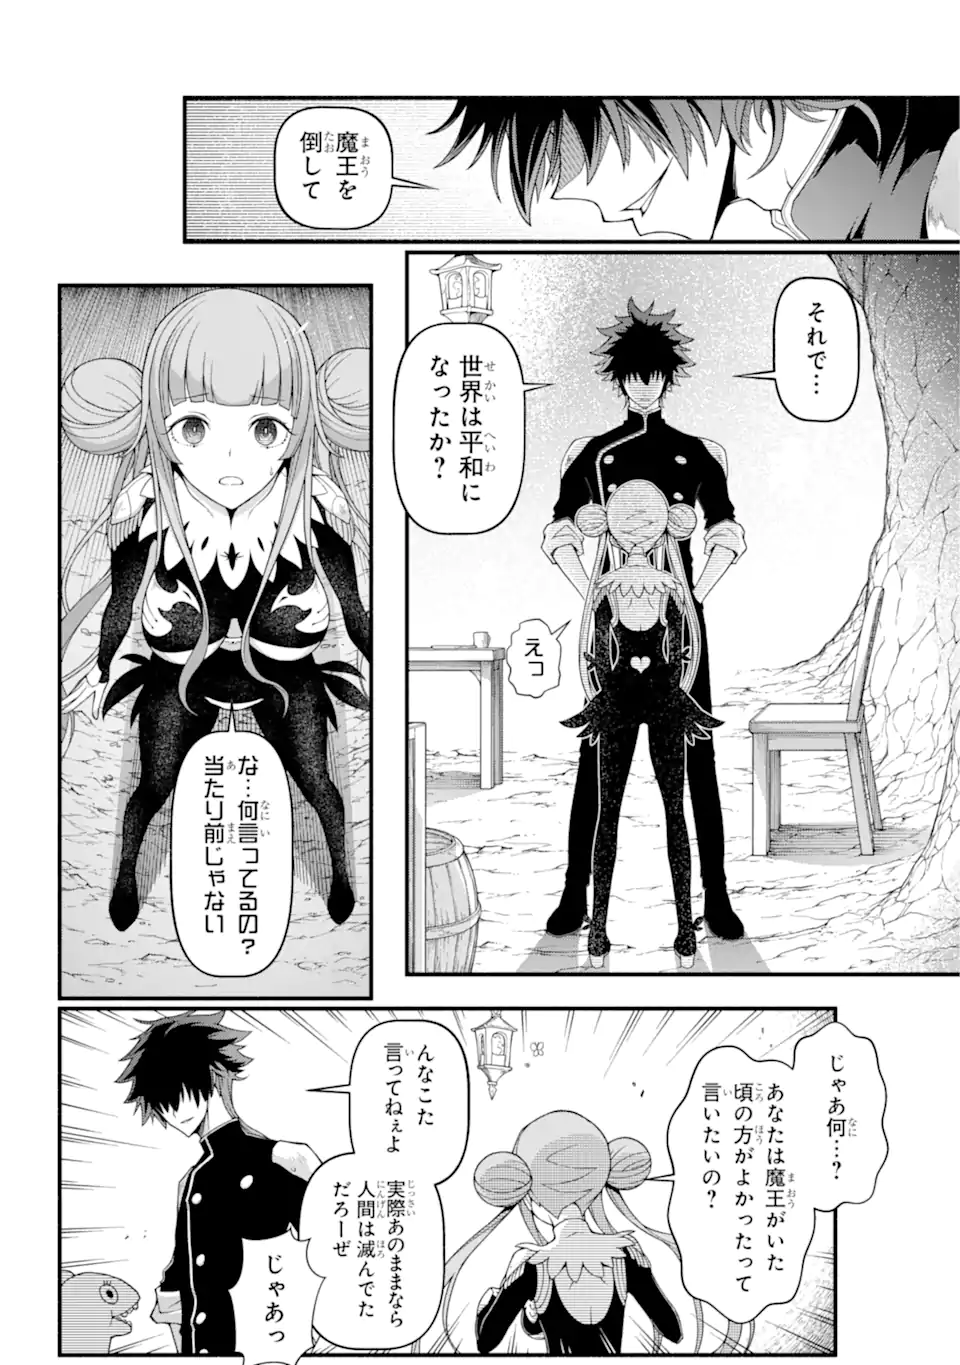 Isekai Cheat Breakers - Chapter 1.3 - Page 2